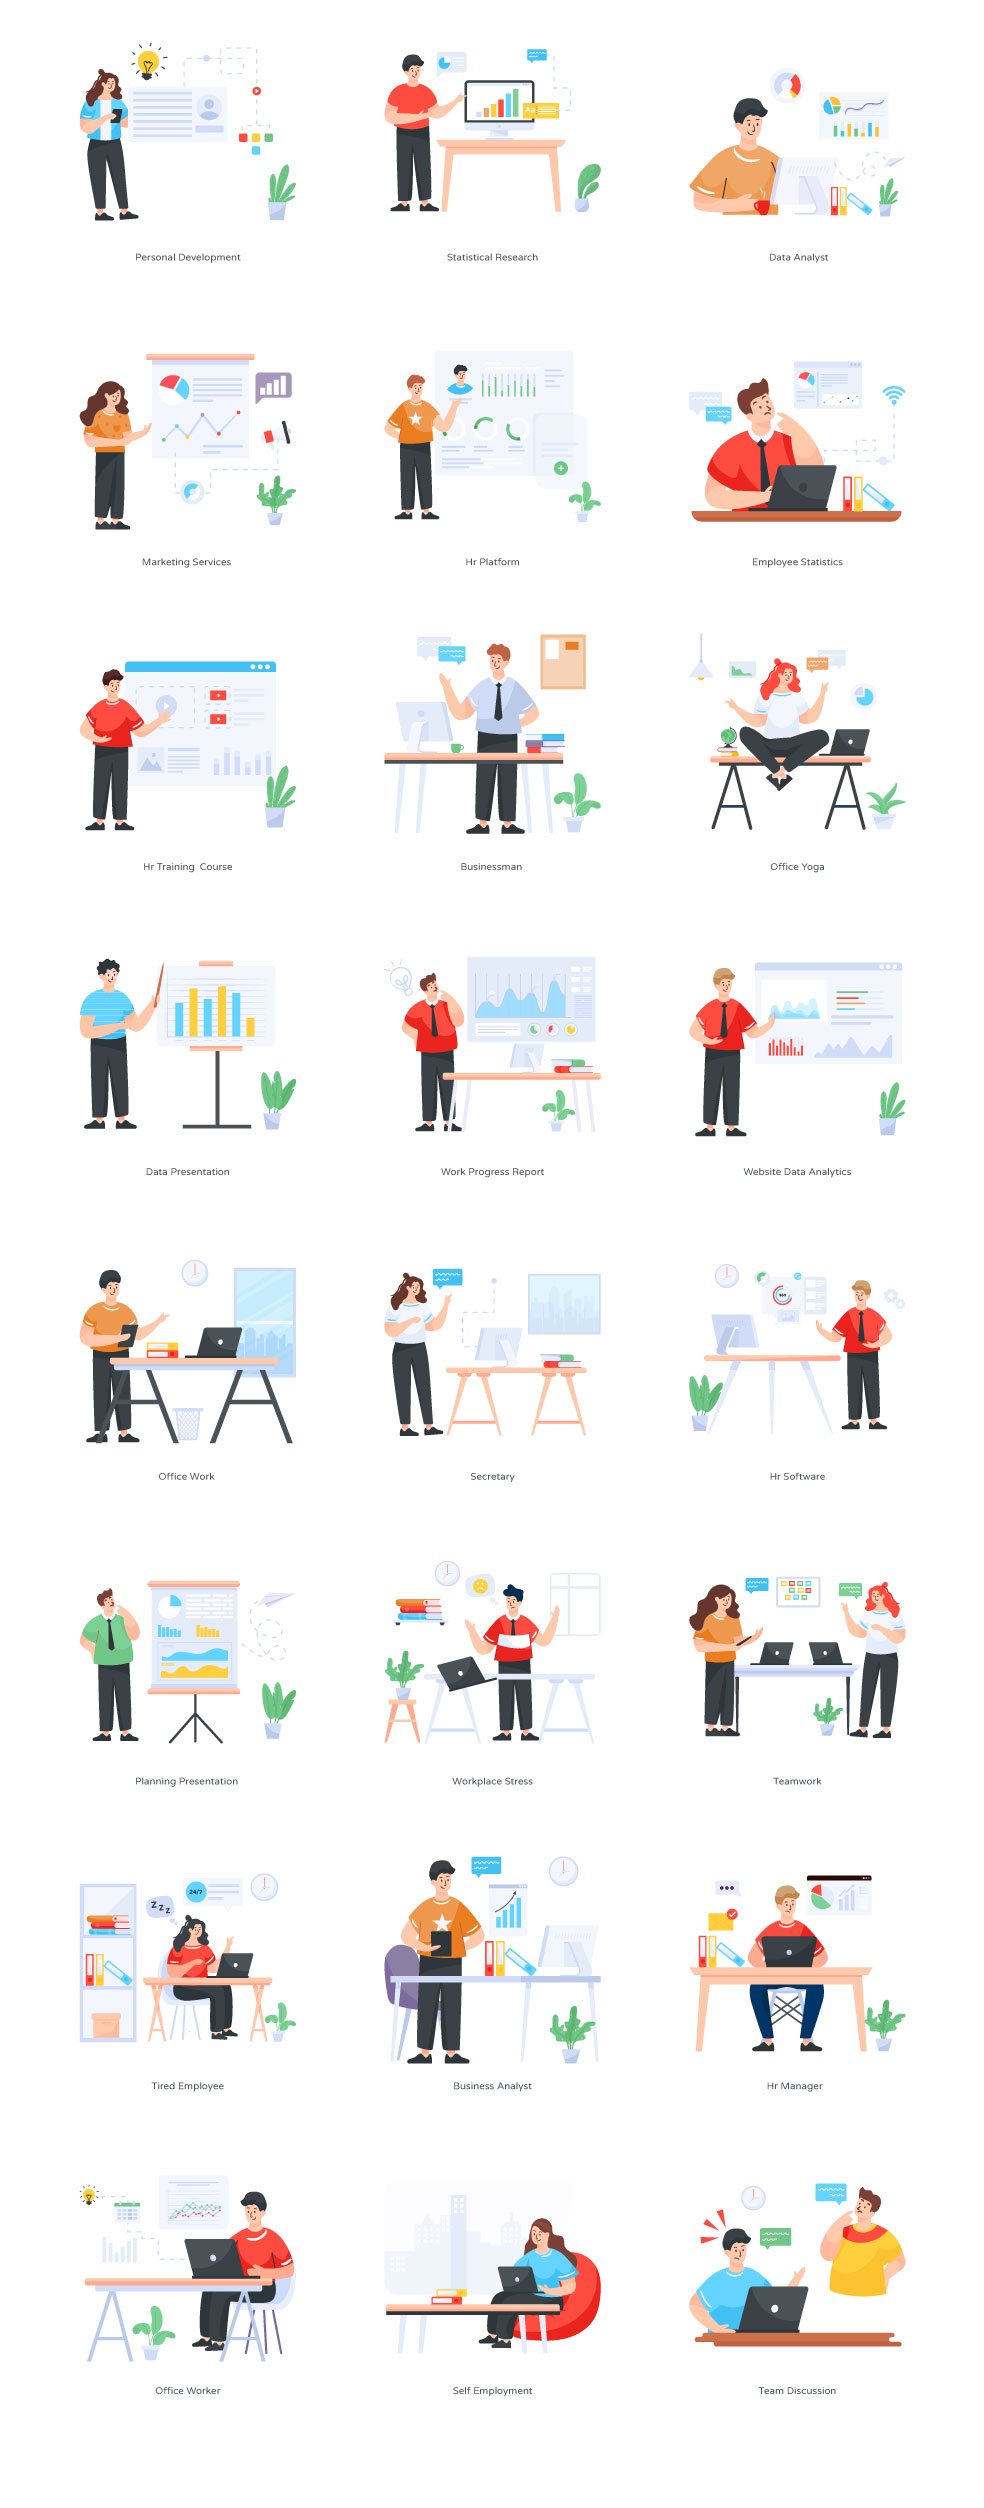 Character-Illustrations-Human-Resources-Management-Full-Preview-1.1